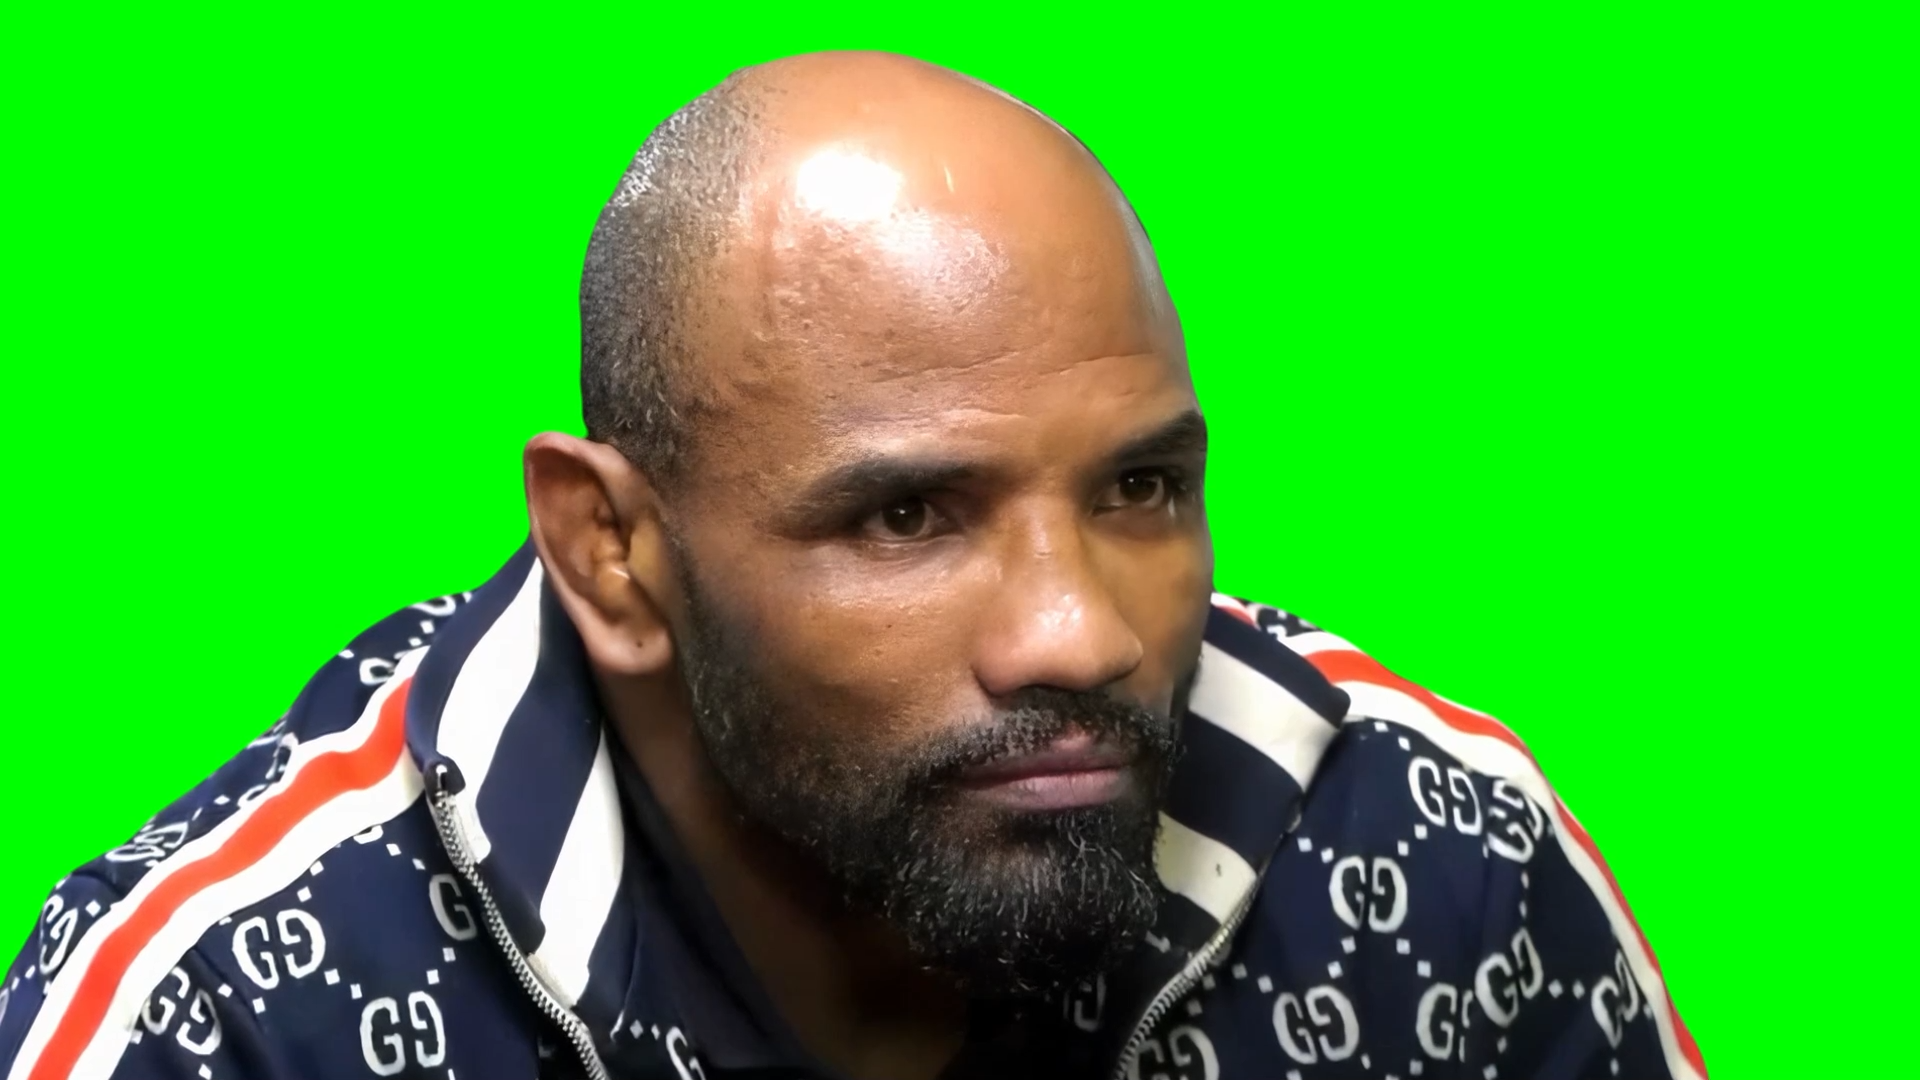 Yoel Romero - Everything is possible in life when you believe (Green Screen)